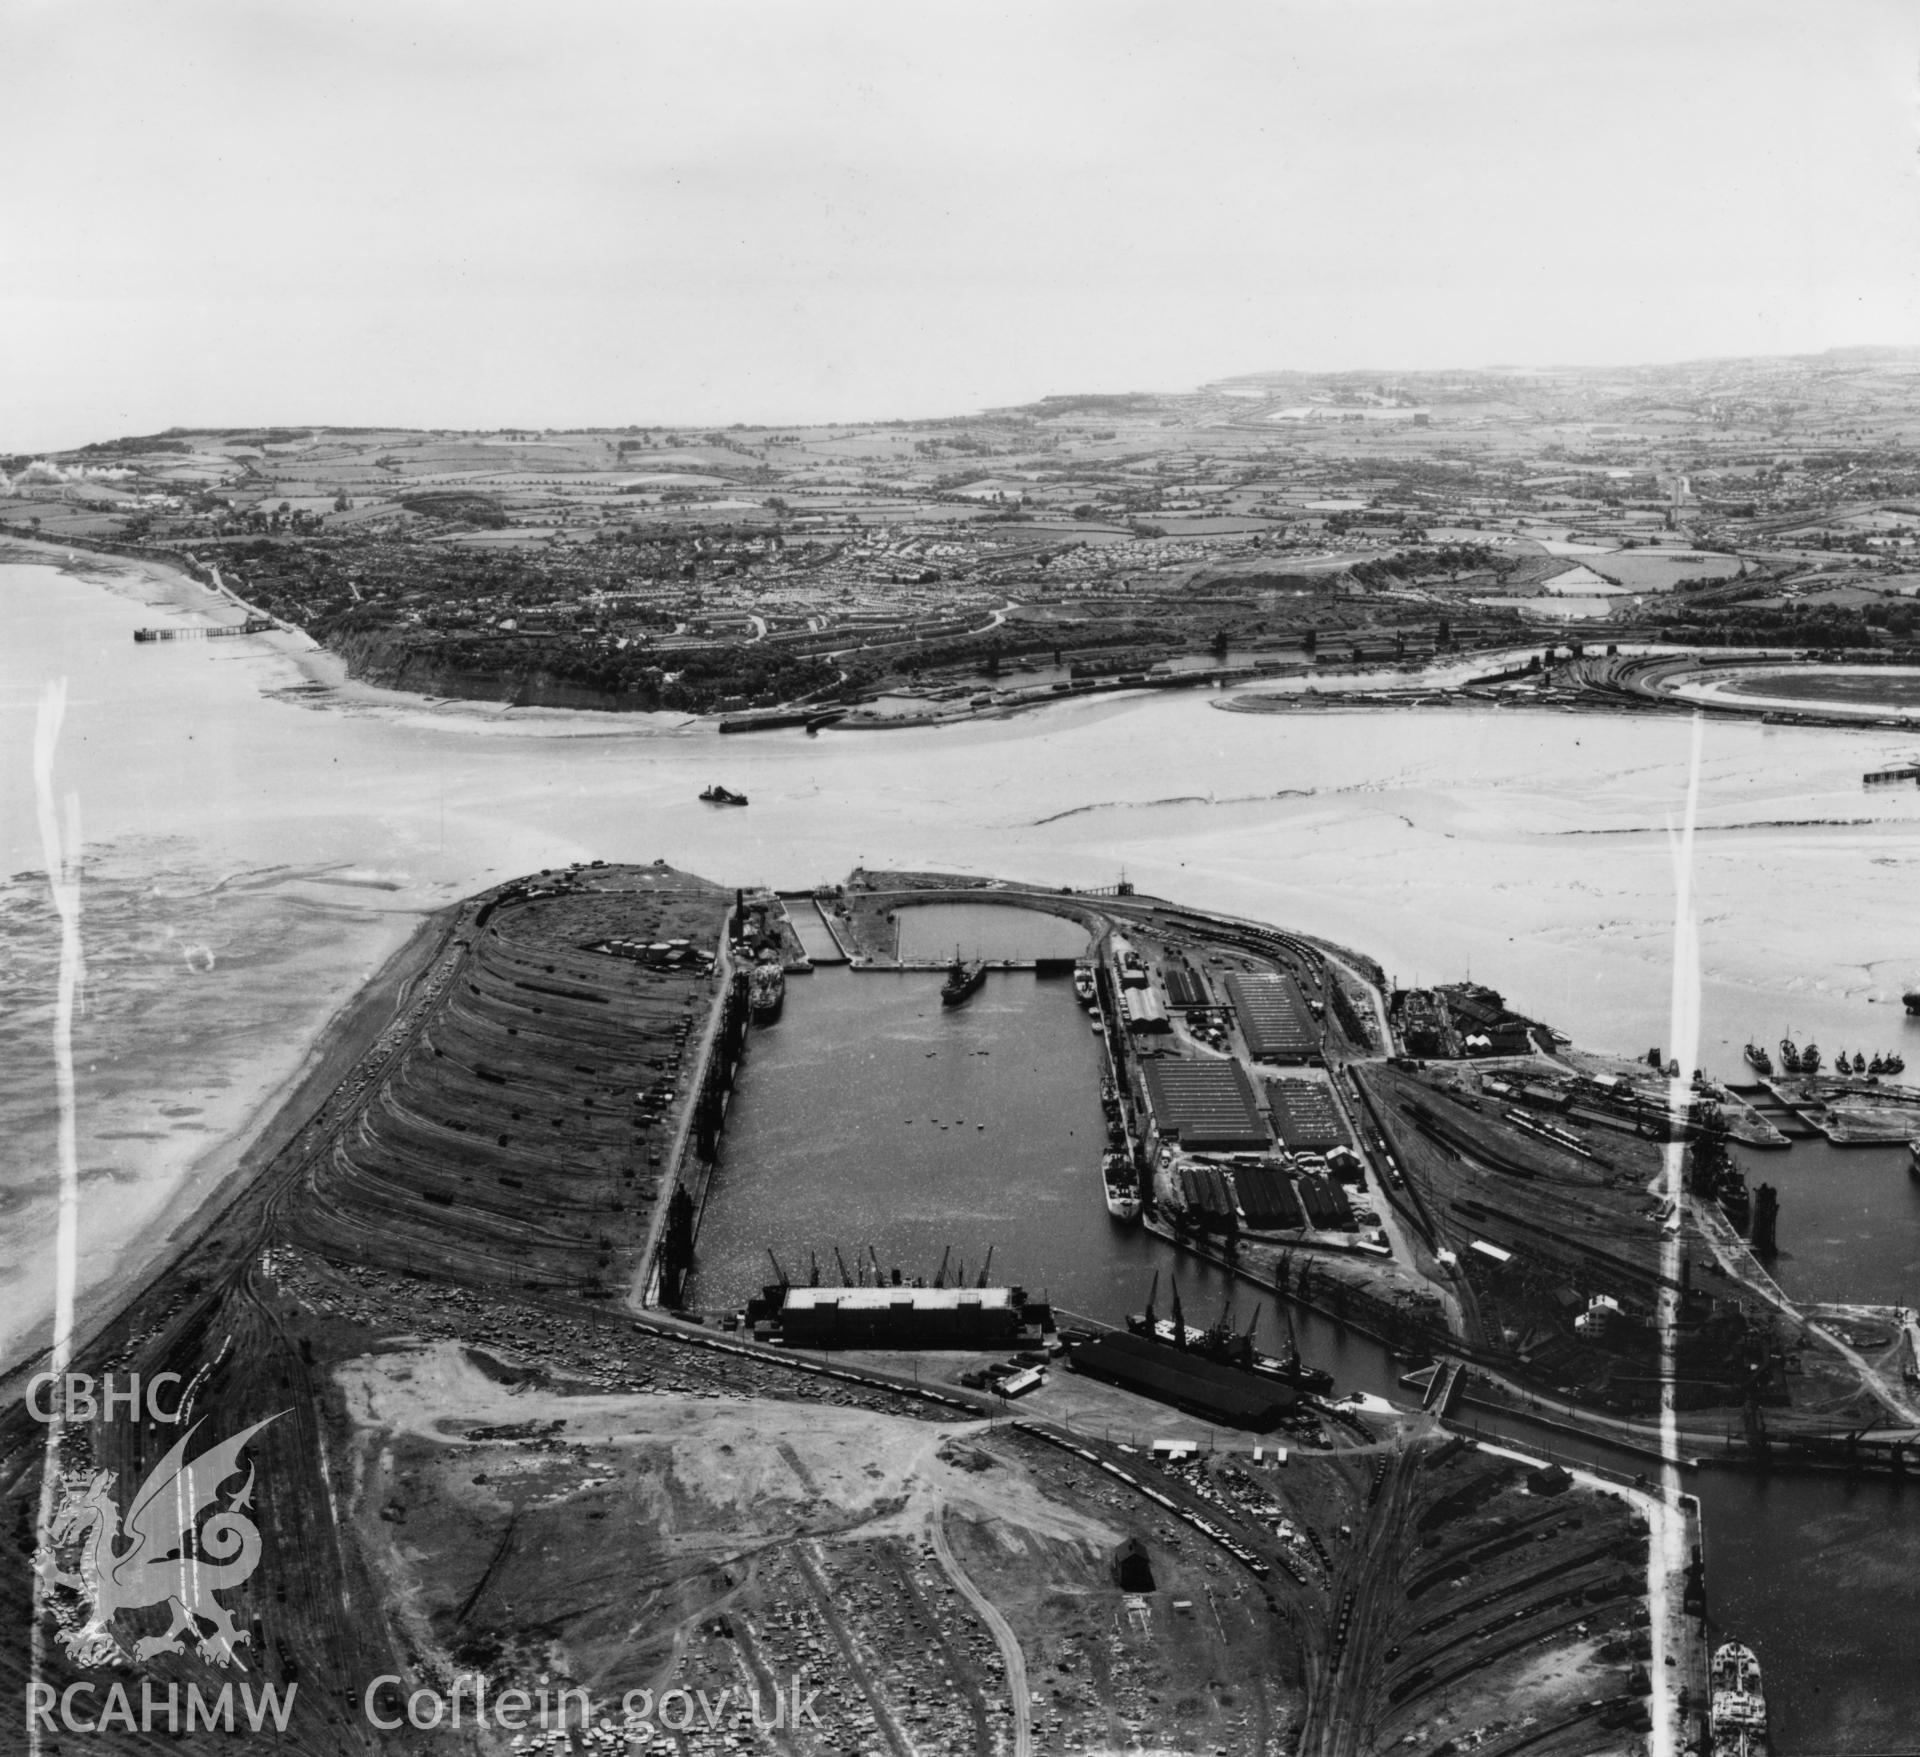 View of Queen Alexandra dock from the east with Penarth in the distance. Oblique aerial photograph, 5?" cut roll film.